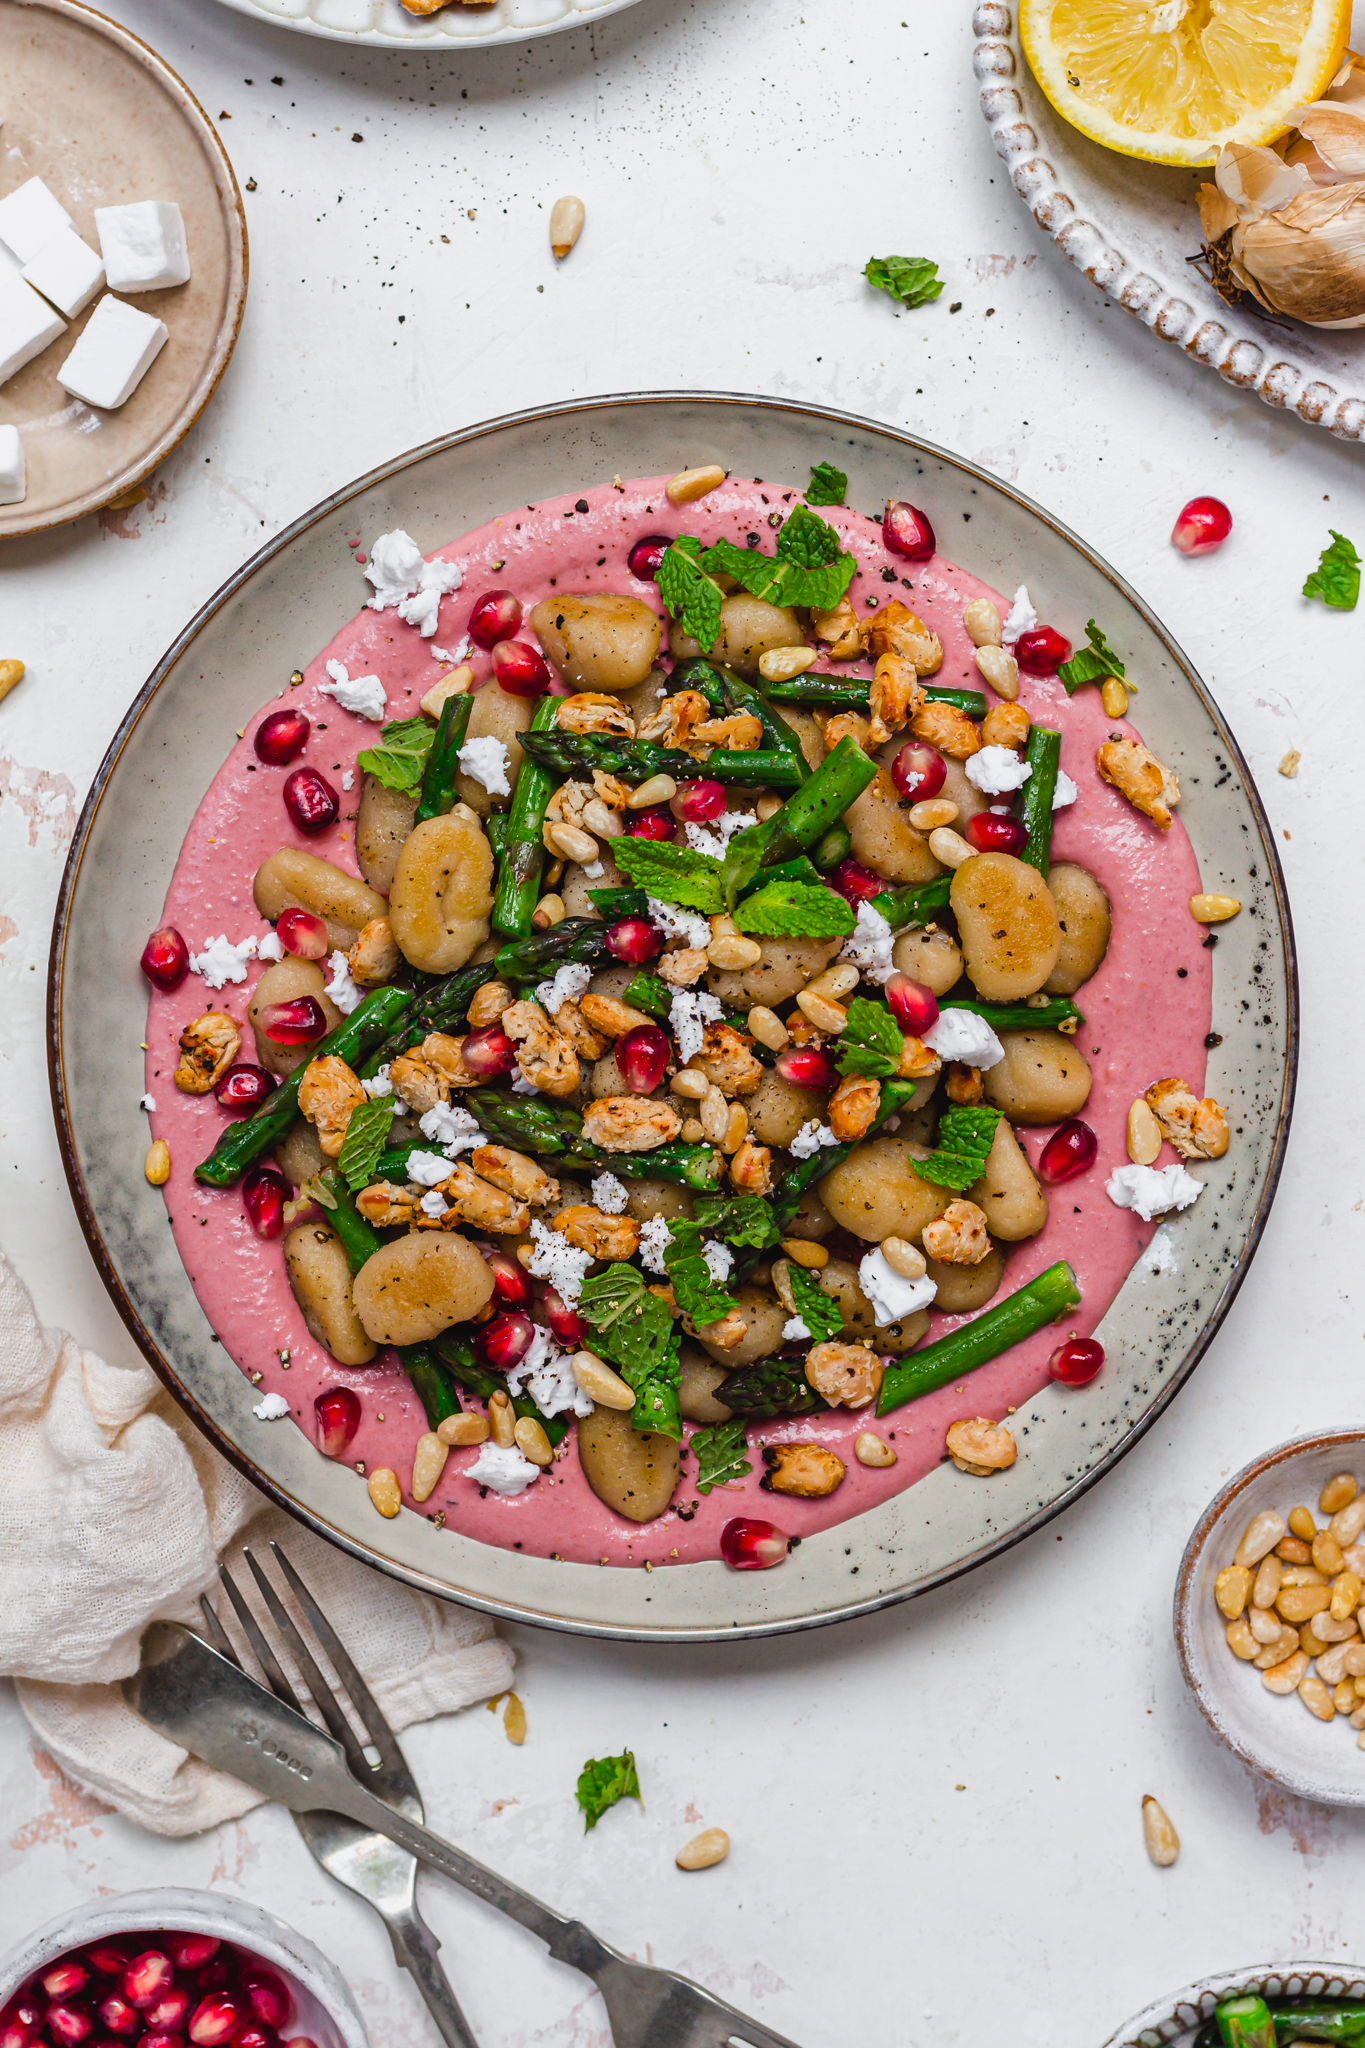 A plate of Vegan Gnocchi with Creamy Beetroot Sauce and Beans